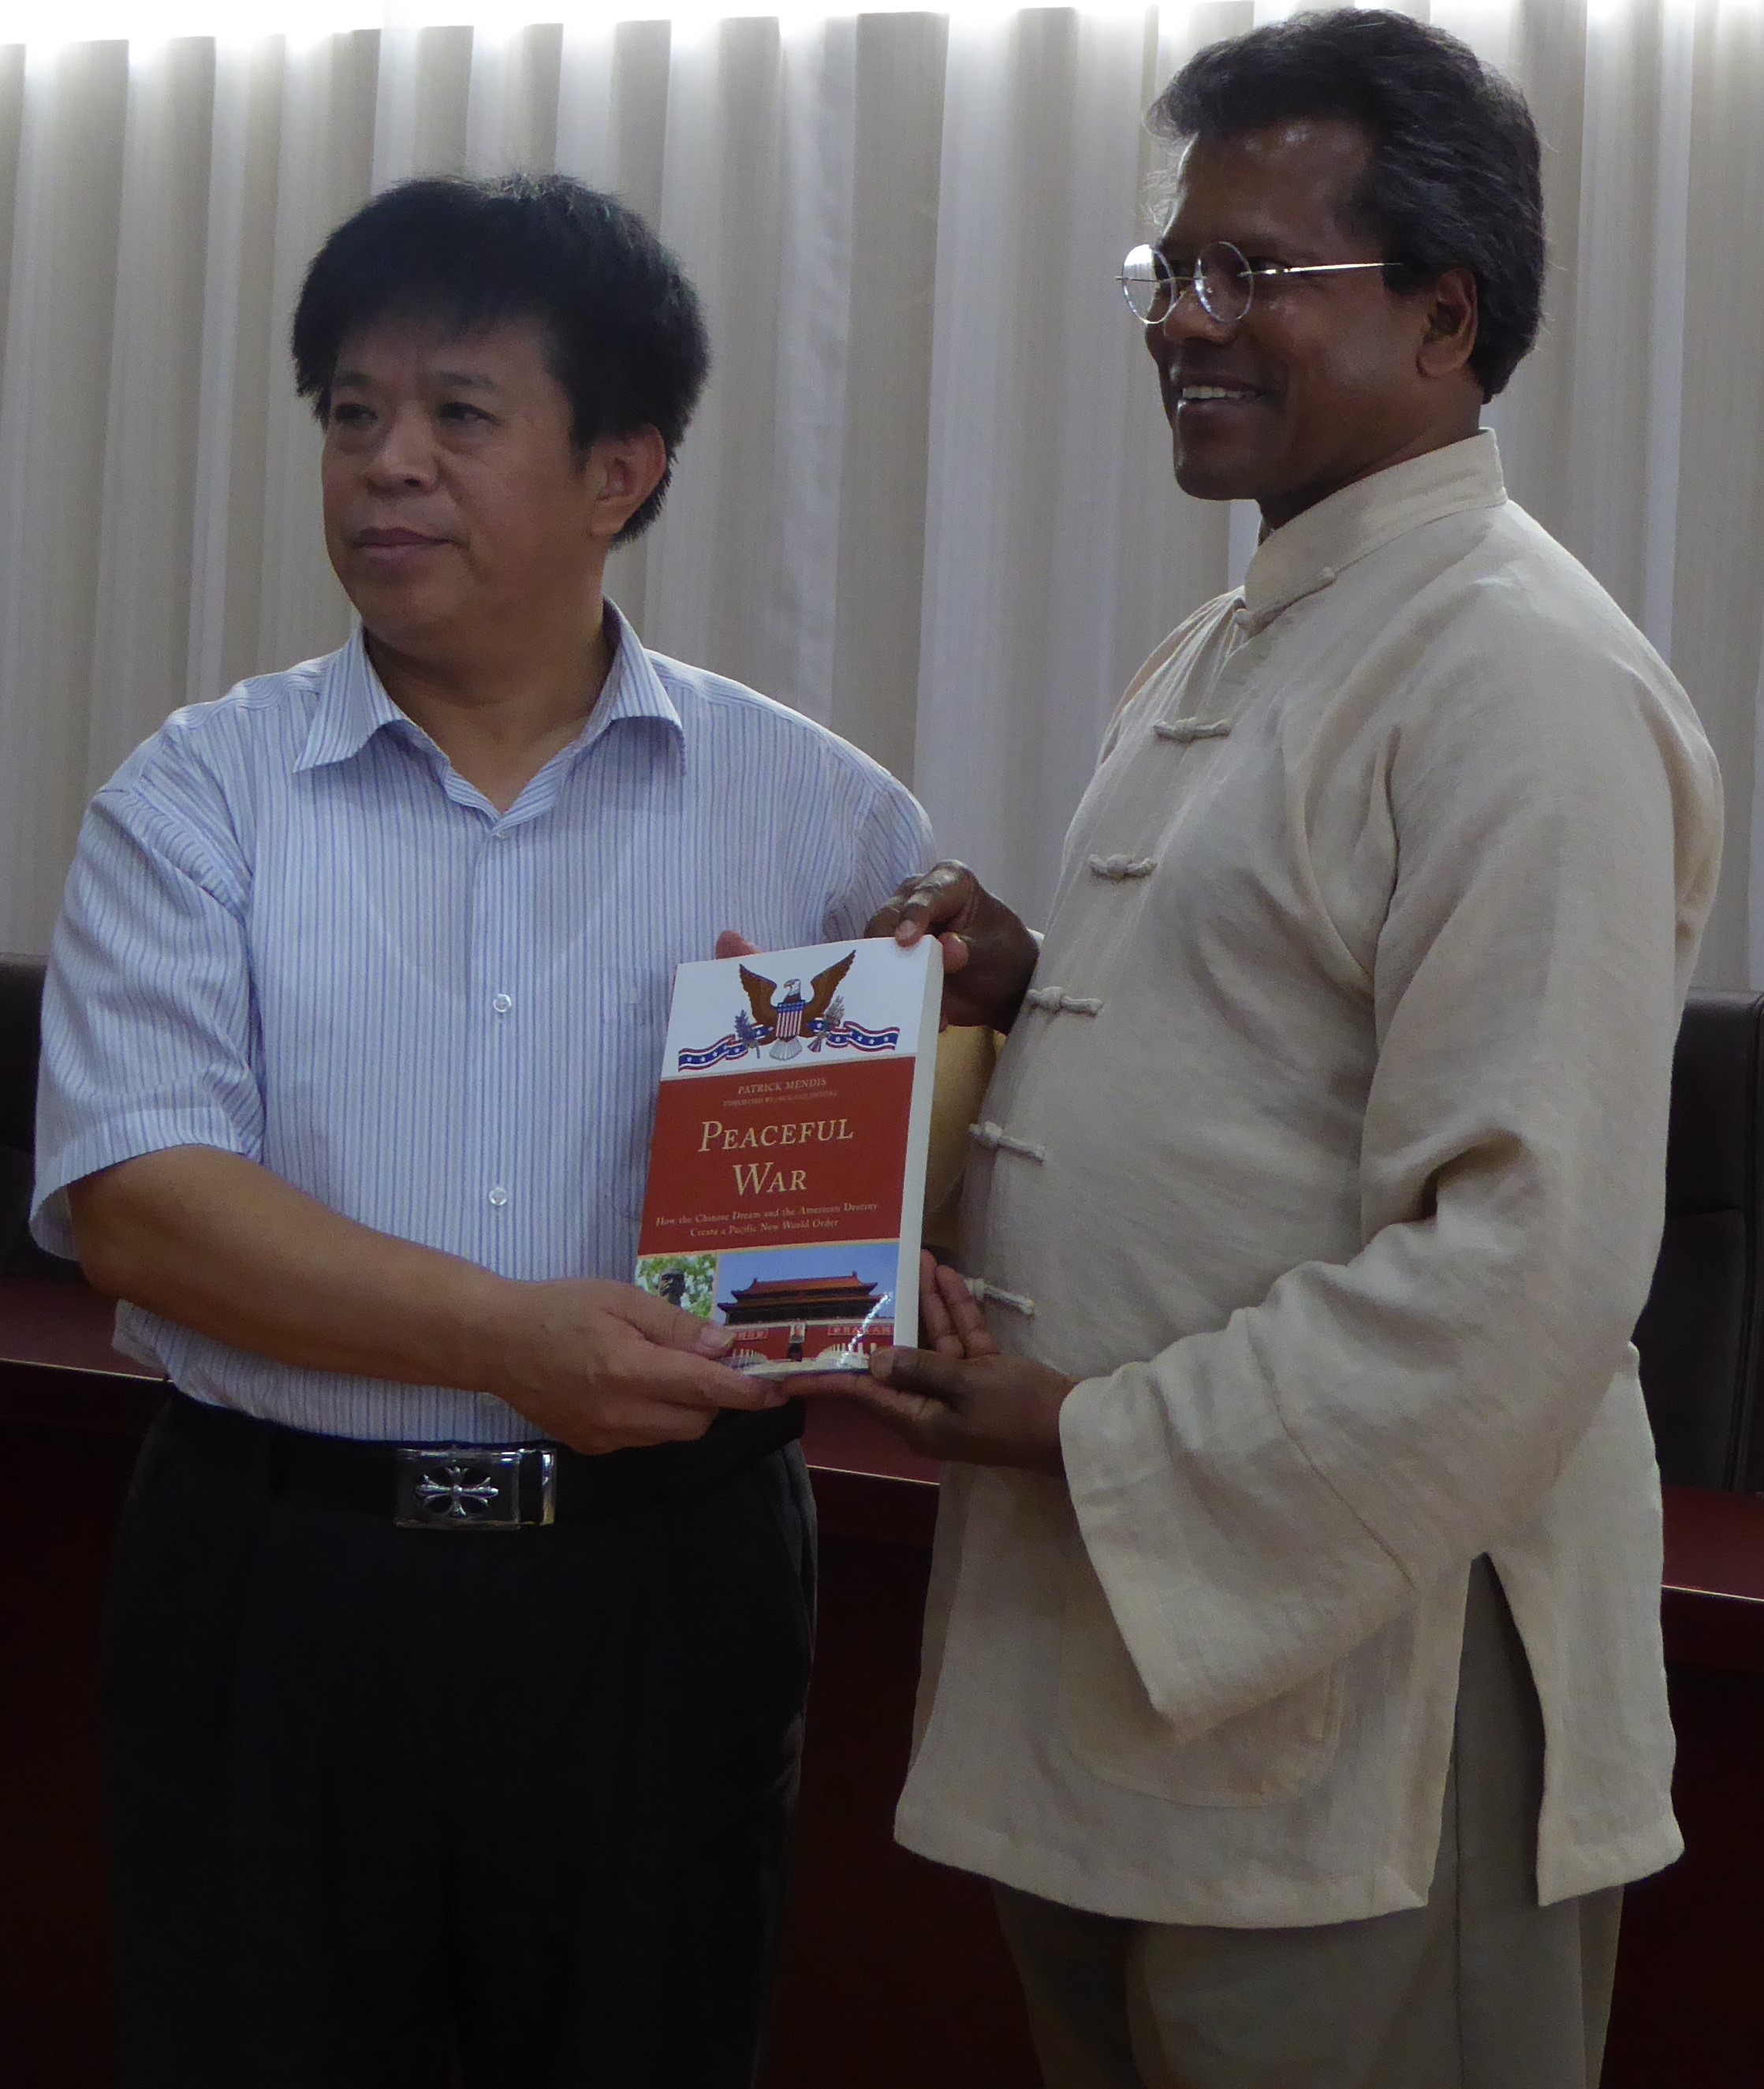 Professor Mendis presenting a copy of his book, Peaceful War, to Prof. Yang Chaoming, Director of the Confucius Research Institute in Qufu.